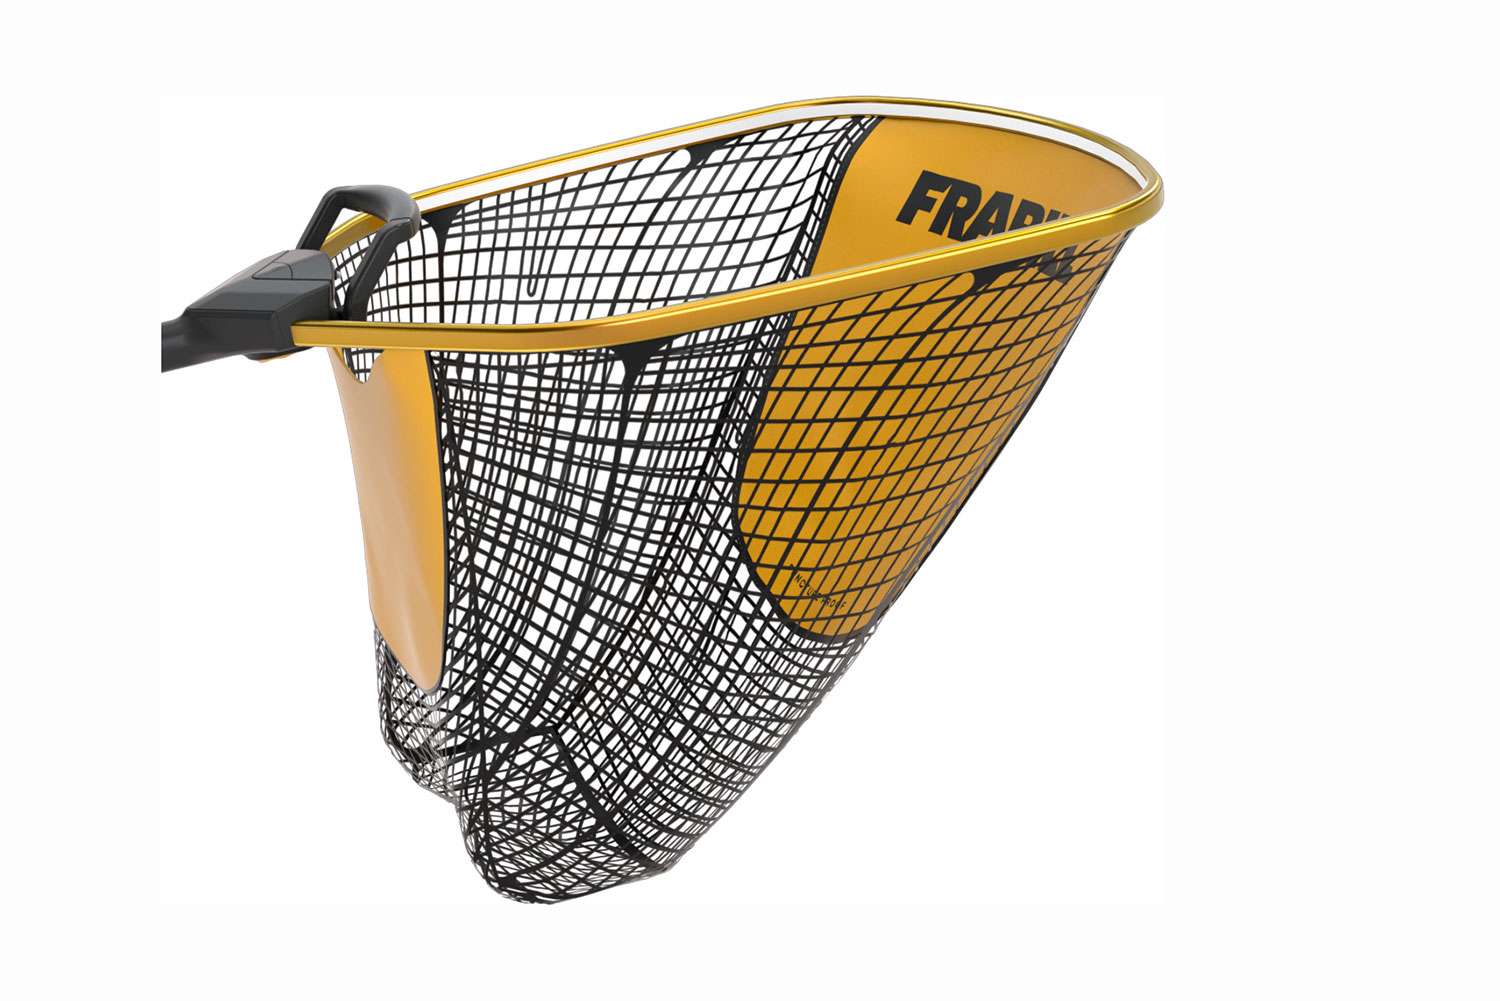 <p><b>Frabill Trophy Haul Nets</b></p>
The Trophy Haul Series combines 80 years of expertise and cutting-edge technology to bring you the next groundbreaking advancement in fishing nets. A revolutionary handled yoke equalizes pressure to improve balance and remove extra stress. All Trophy Haul nets include conservation netting, Lockdown asymmetrical net design, and a MeshGuard hoop. Available in multiple hoop sizes to accommodate whatever species you're targeting, including: trout, bass, panfish, walleye, salmon, redfish and catfish.<br>
<p><b>MSRP: $89.99-$149.99</b></p>
<a href=